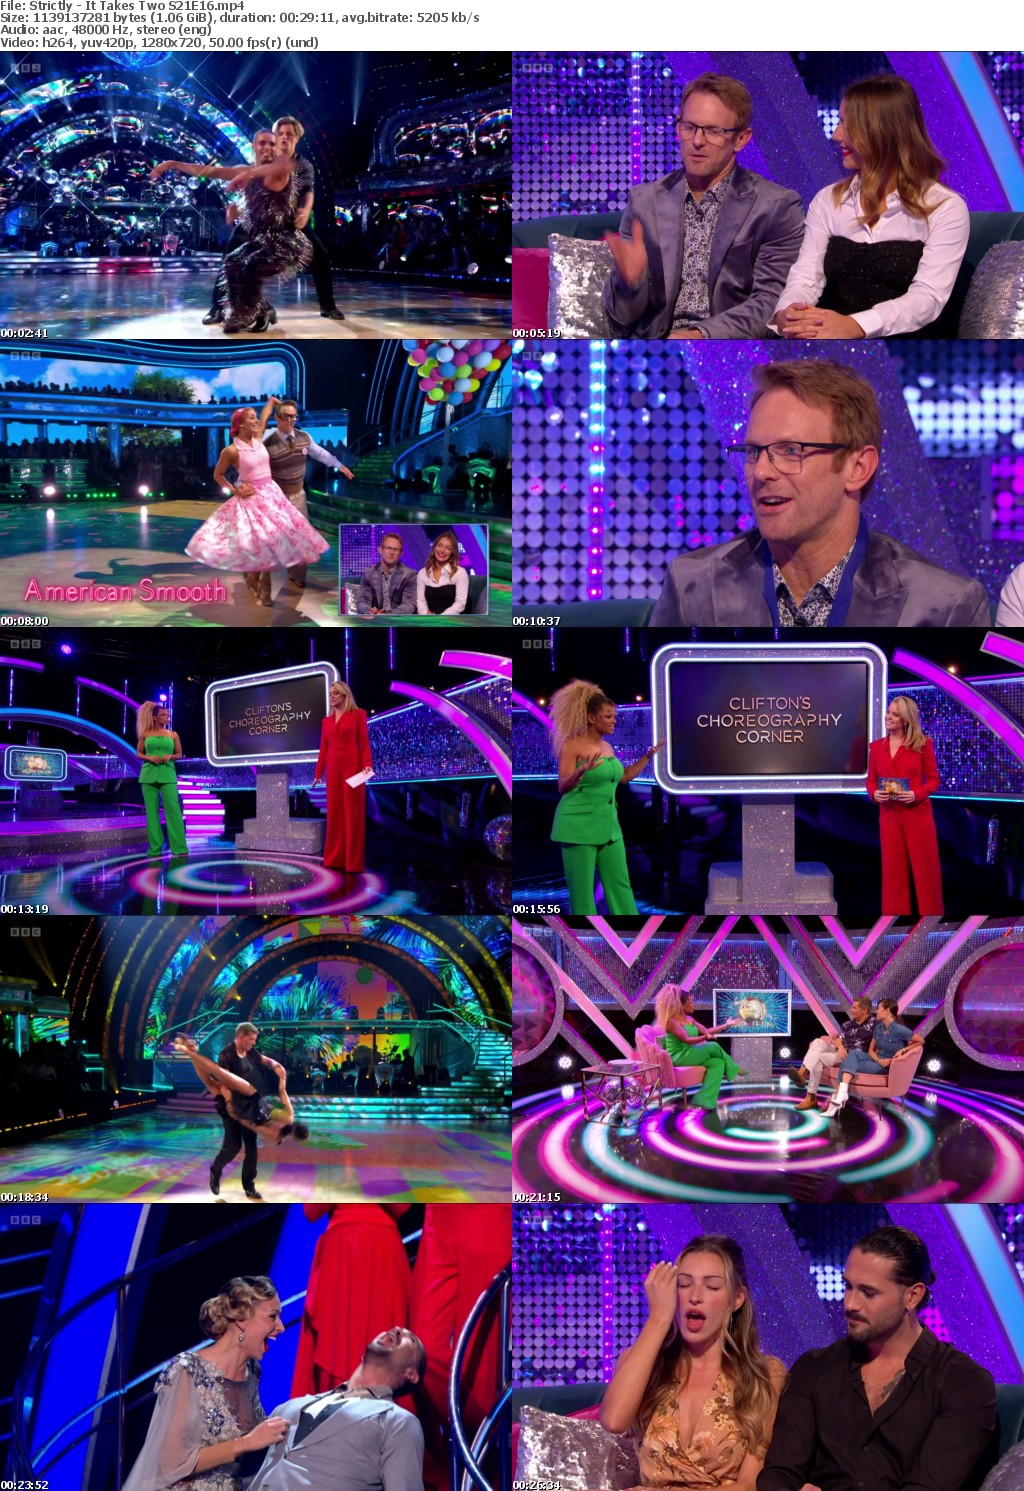 Strictly - It Takes Two S21E16 (1280x720p HD, 50fps, soft Eng subs)